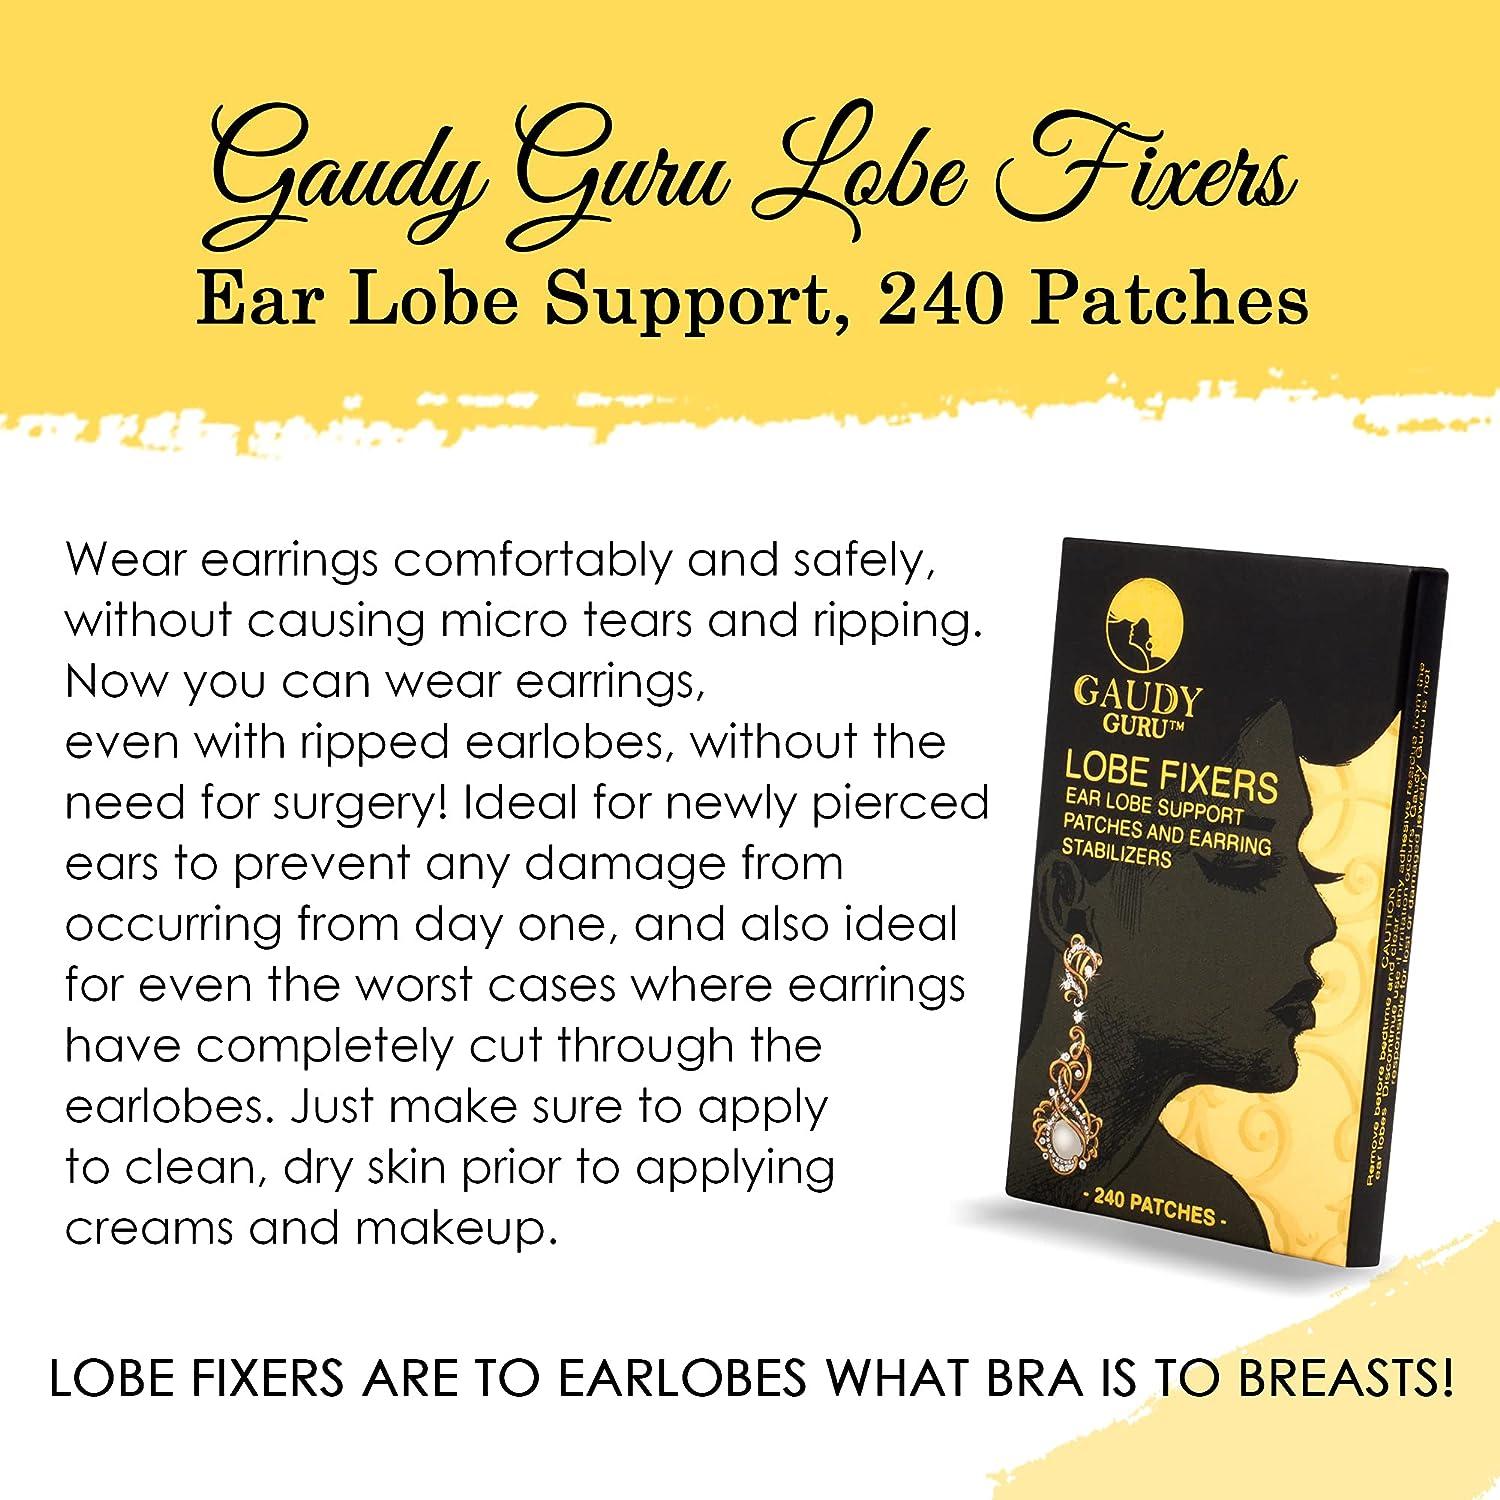 Ear Lobe Support Patches and Earring Stabilizers (240 Invisible Patches)  Prevents Tears Reduces Strain. Lobe Fixers by Gaudy Guru ( ) (Invisible)